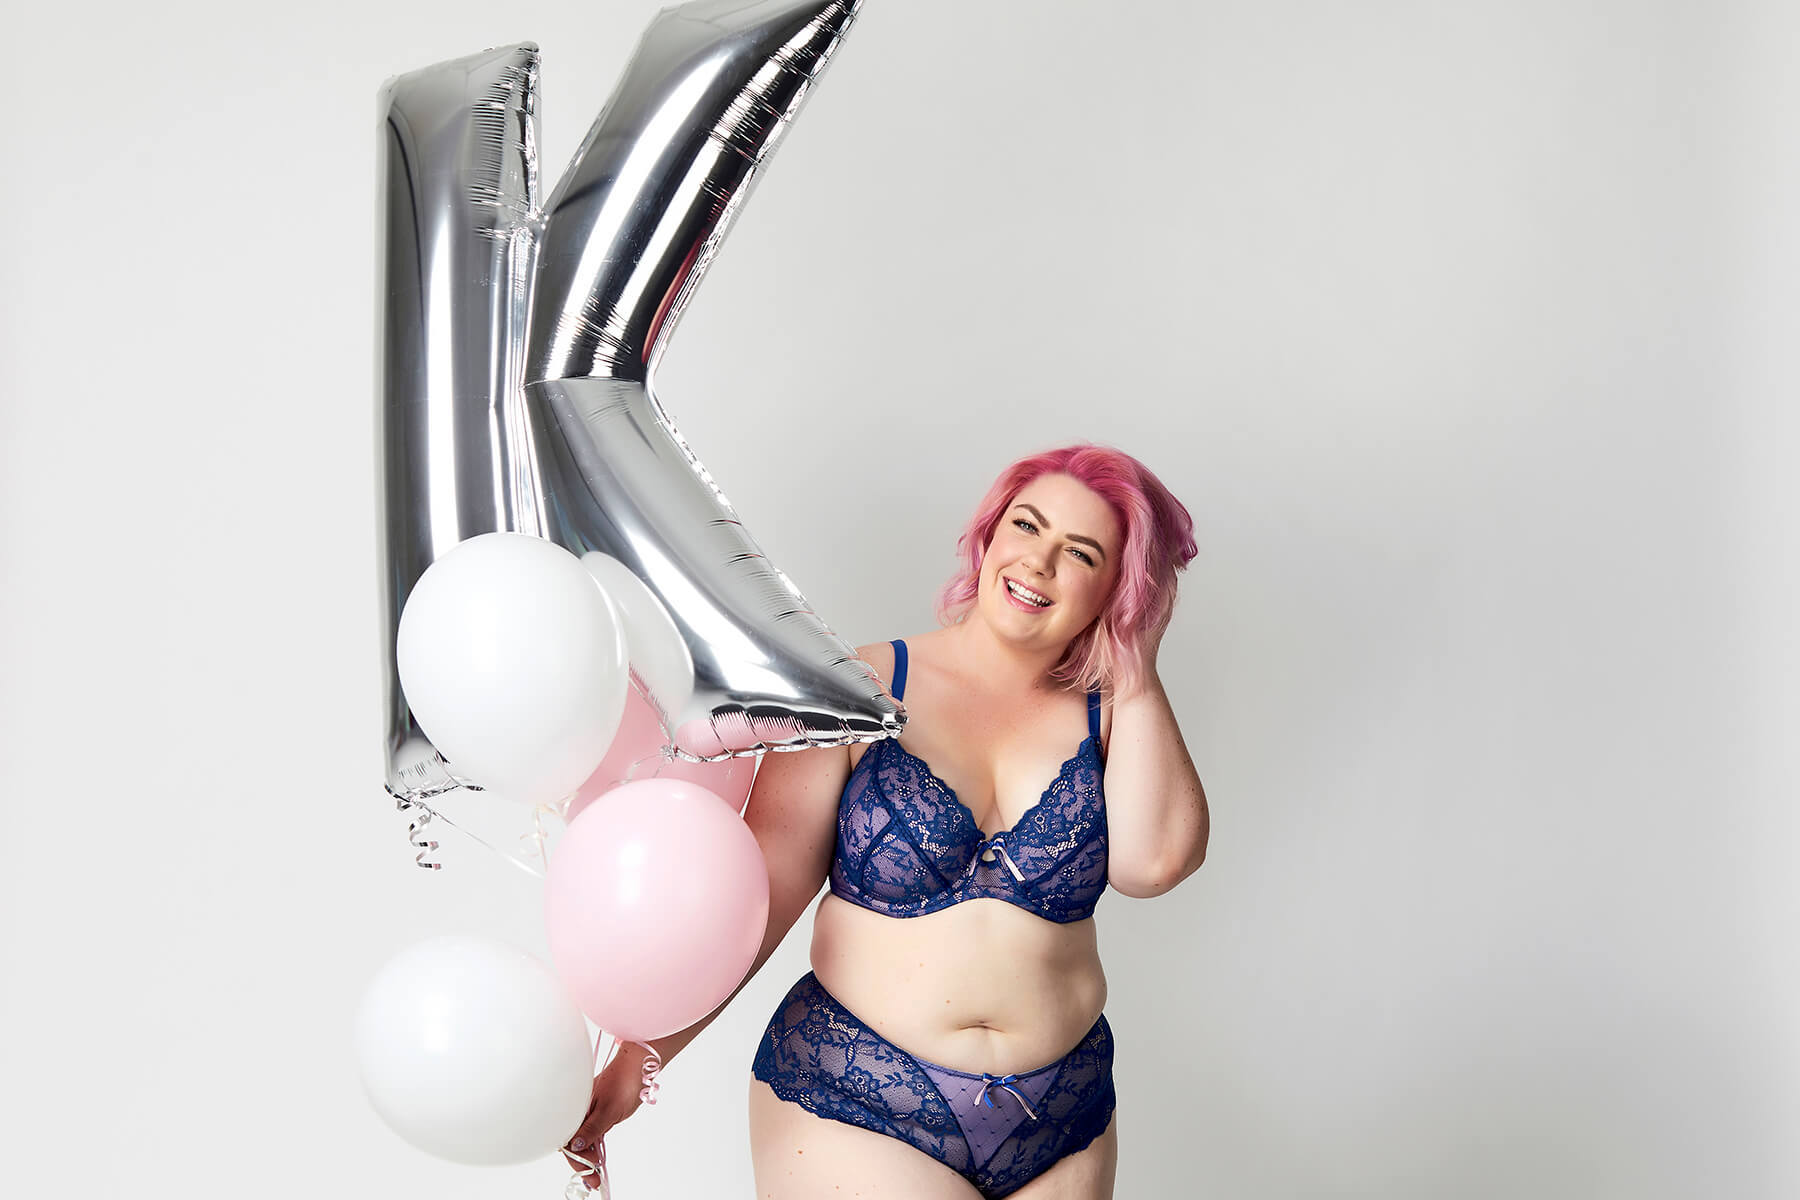 Amy Willows wearing lingerie, holding balloons